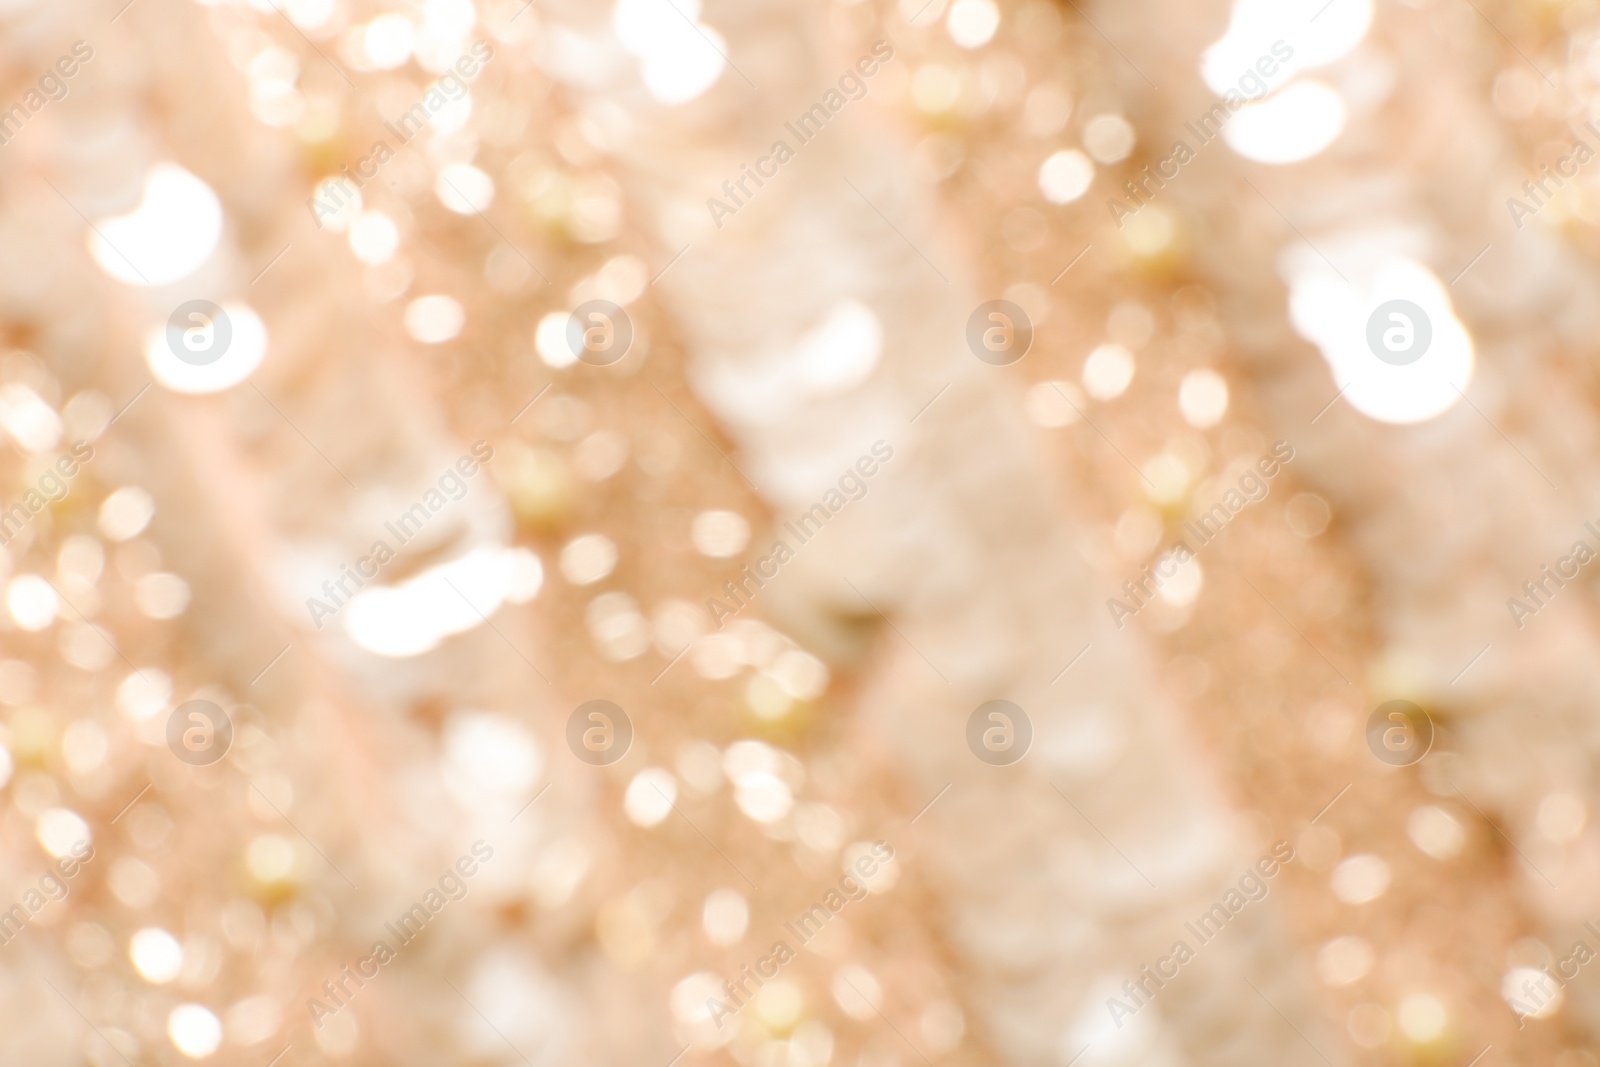 Photo of Blurred view of shiny rose gold surface as background